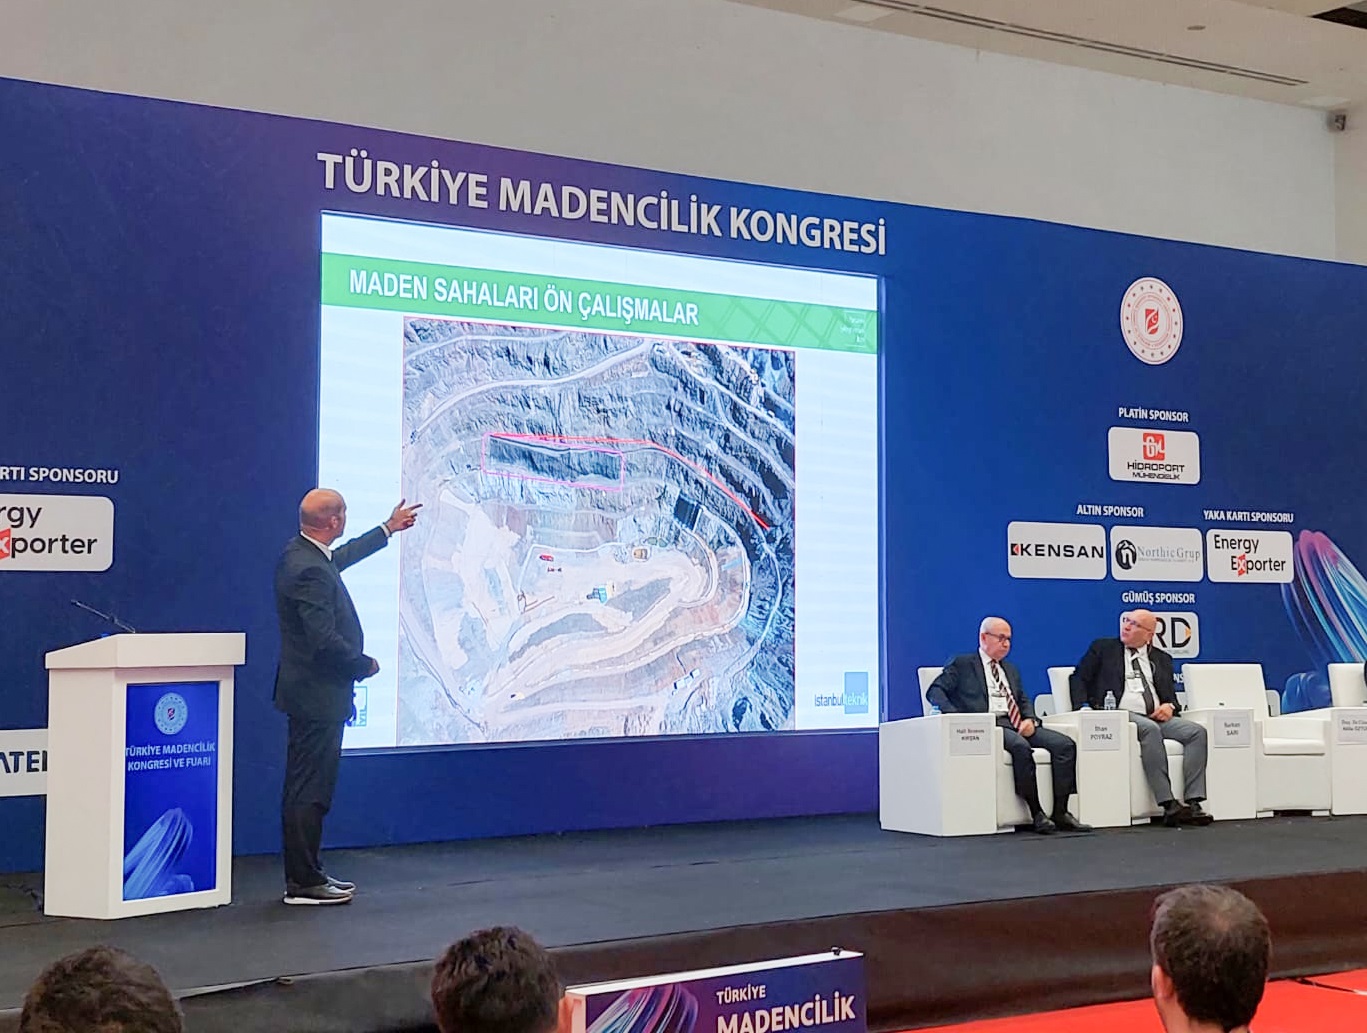  We introduced our products and solutions to the mining industry at the Türkiye Mining Congress and Expo.